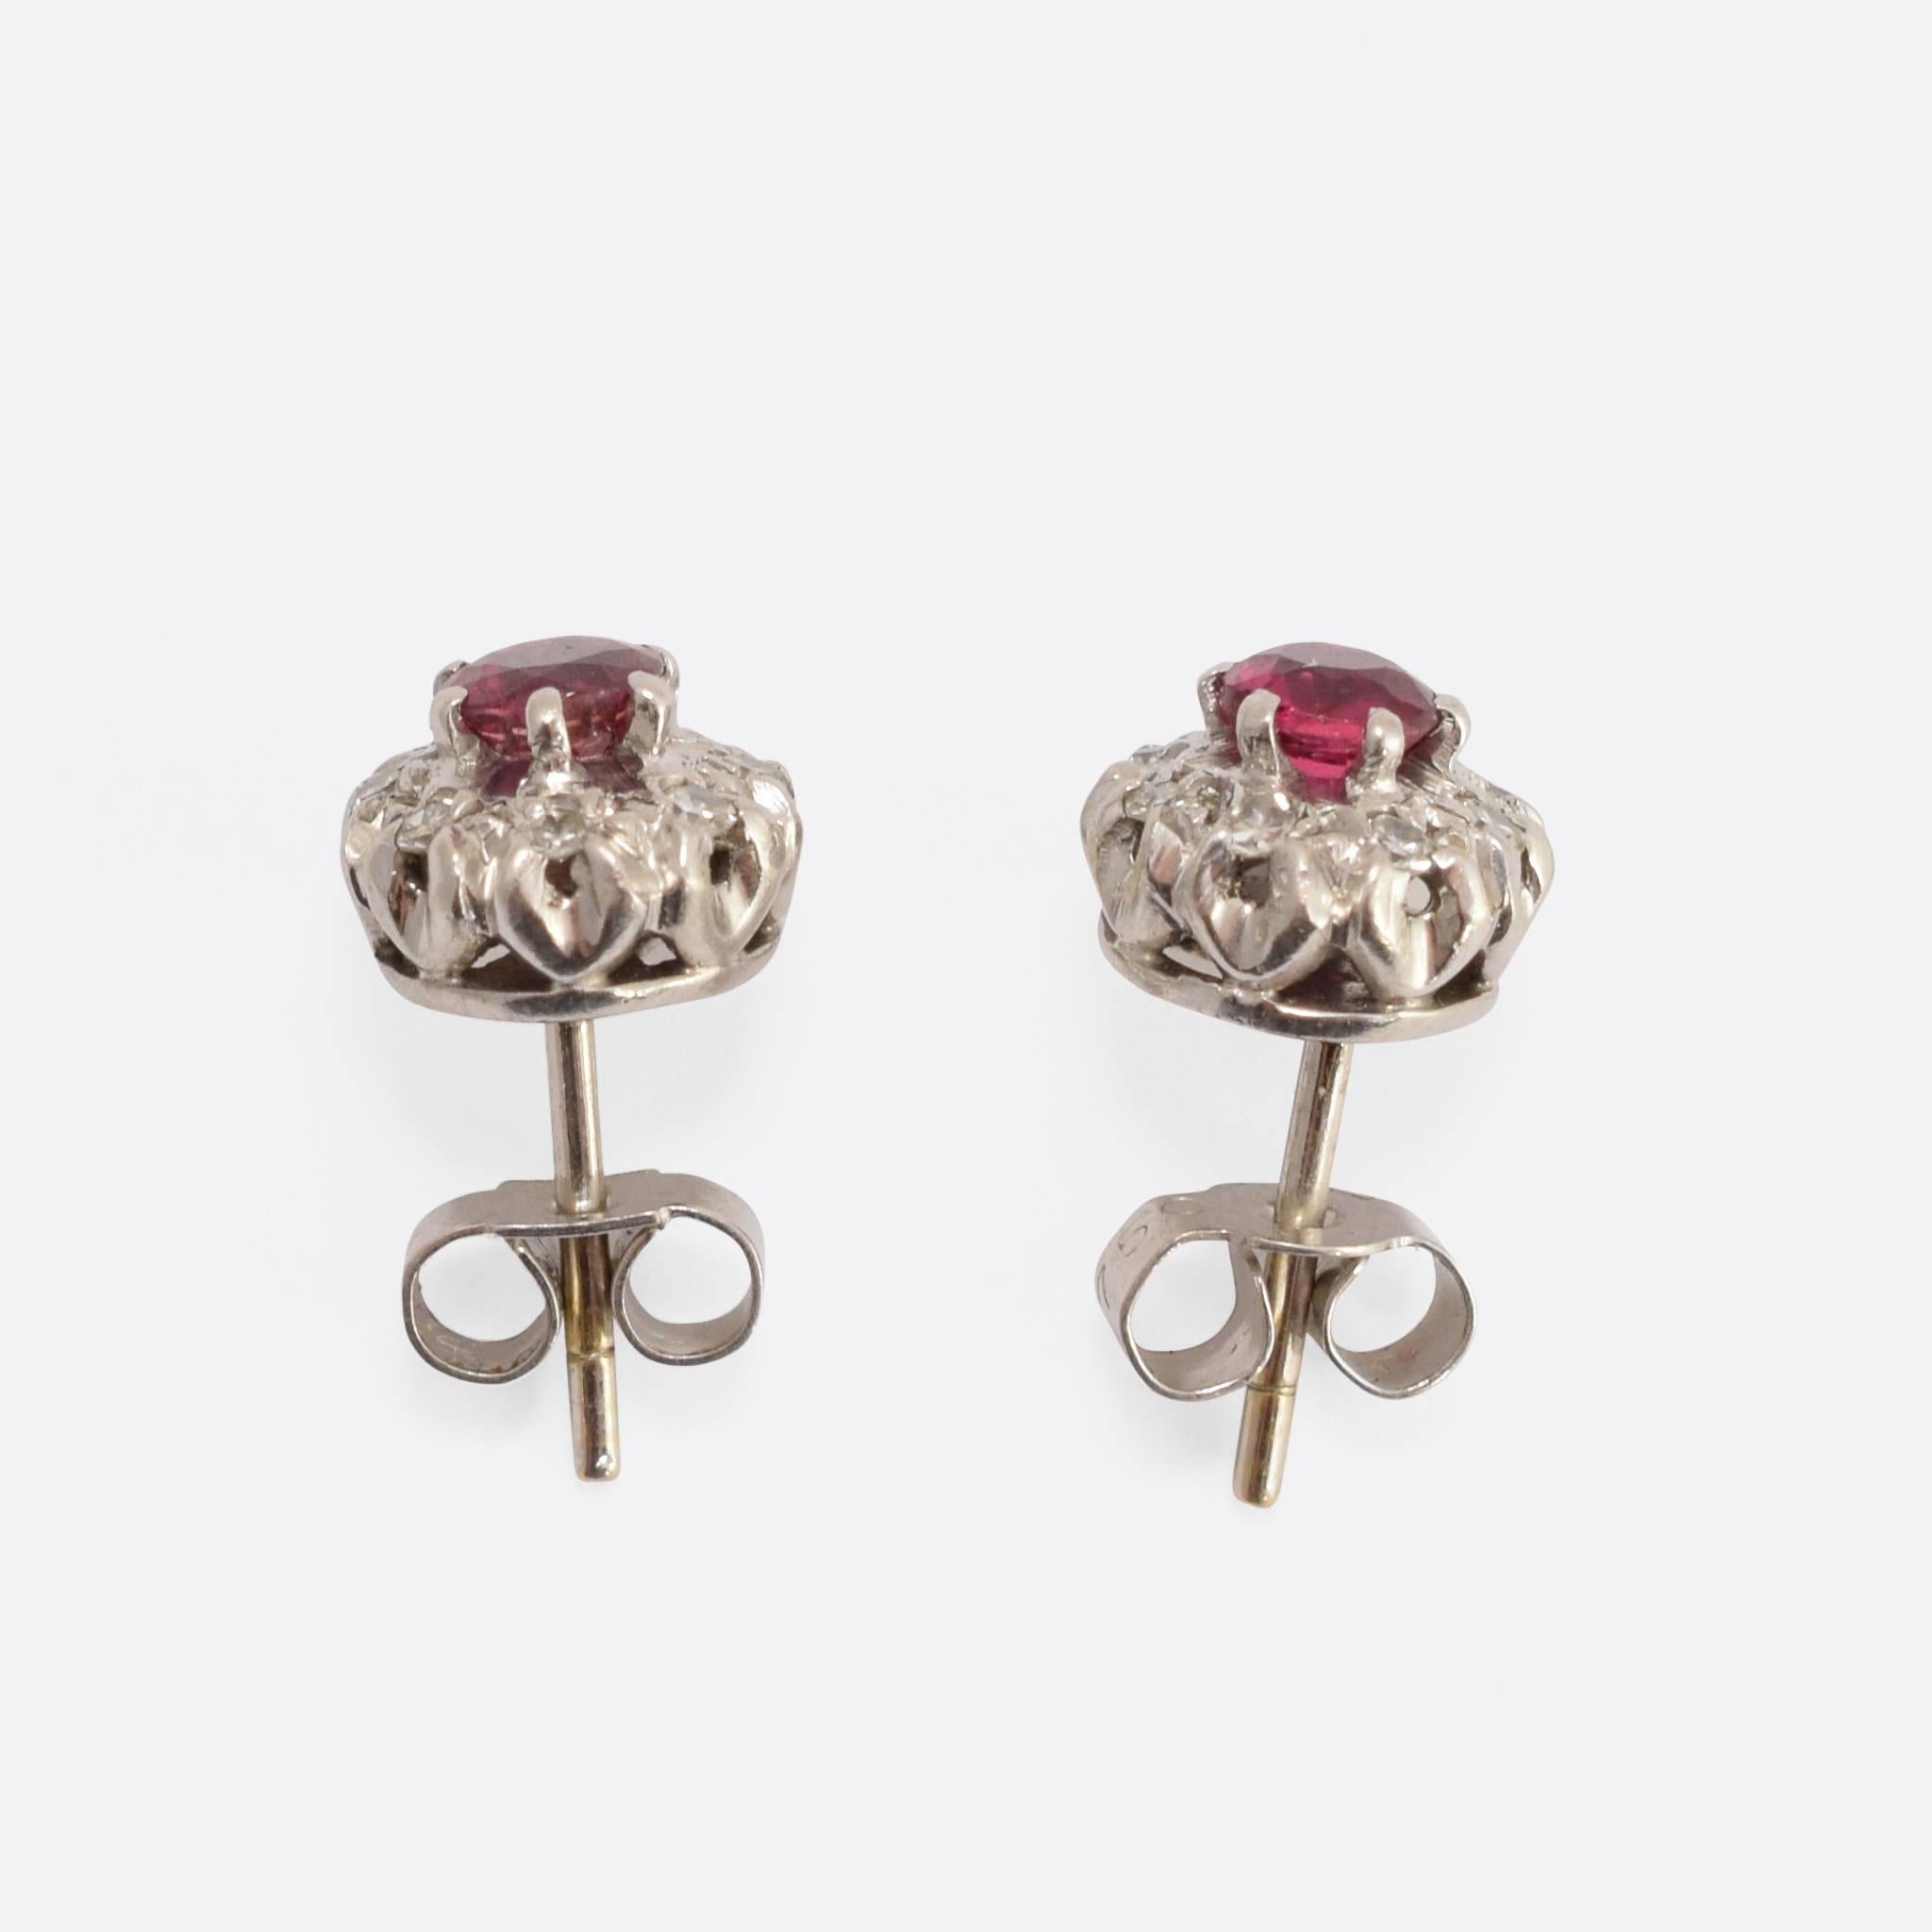 This sublime pair of cluster earrings date to the Art Deco period, c.1930. These exceptional studs are set with bright central rubies, each surrounded by a halo of diamonds. They're modelled in 18k white gold, and a good size at just under 1cm wide.